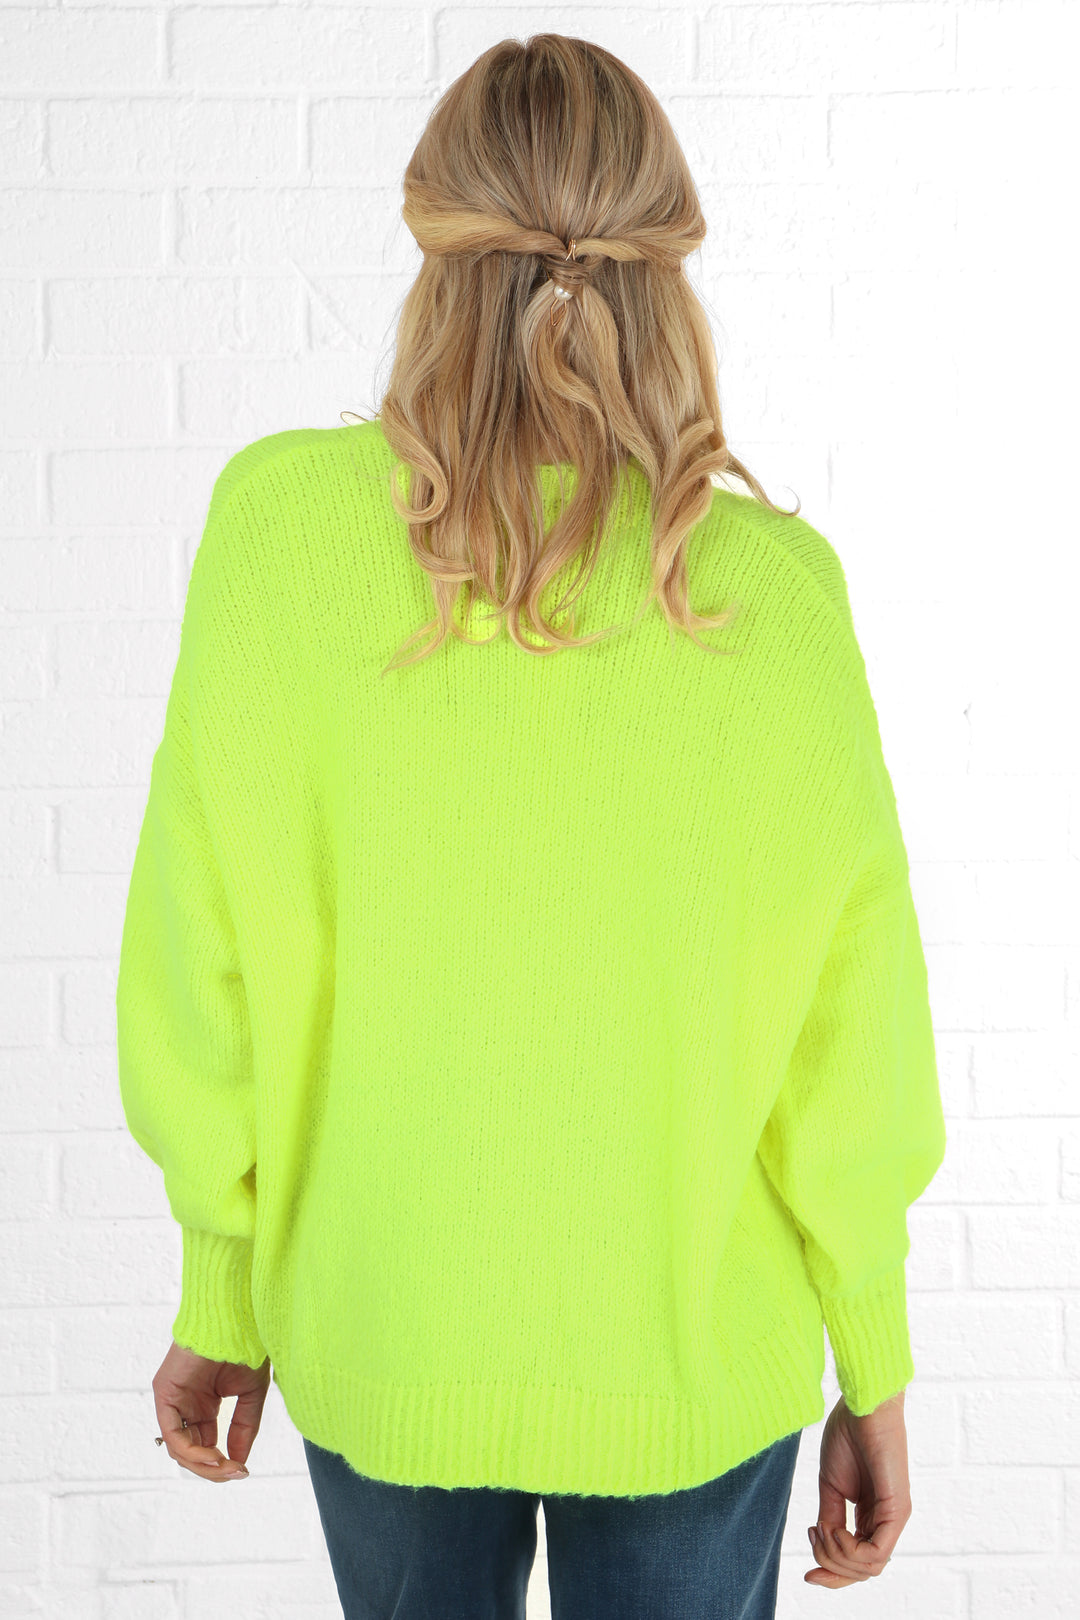 model showing the back of the neon yellow cardigan showing an all over solid colour